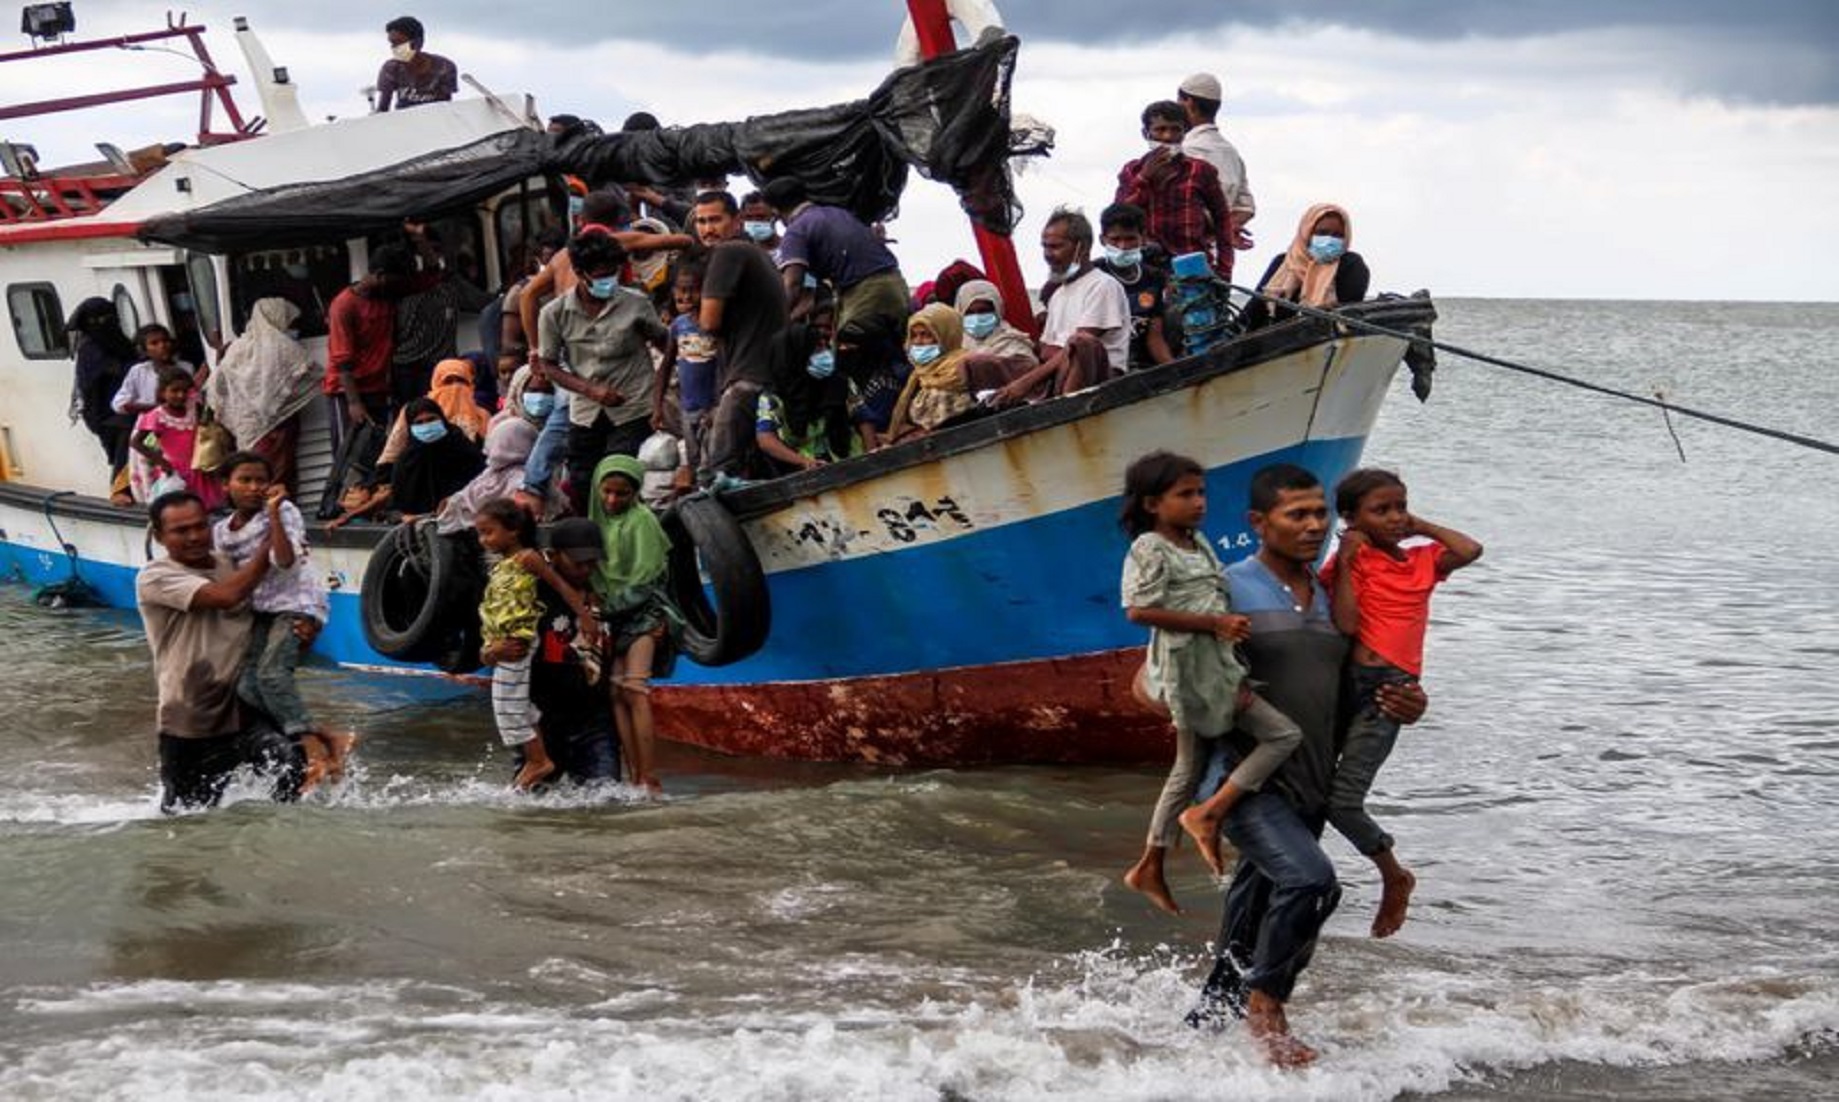 Indonesian fishermen rescue nearly 100 Rohingya refugees in Aceh